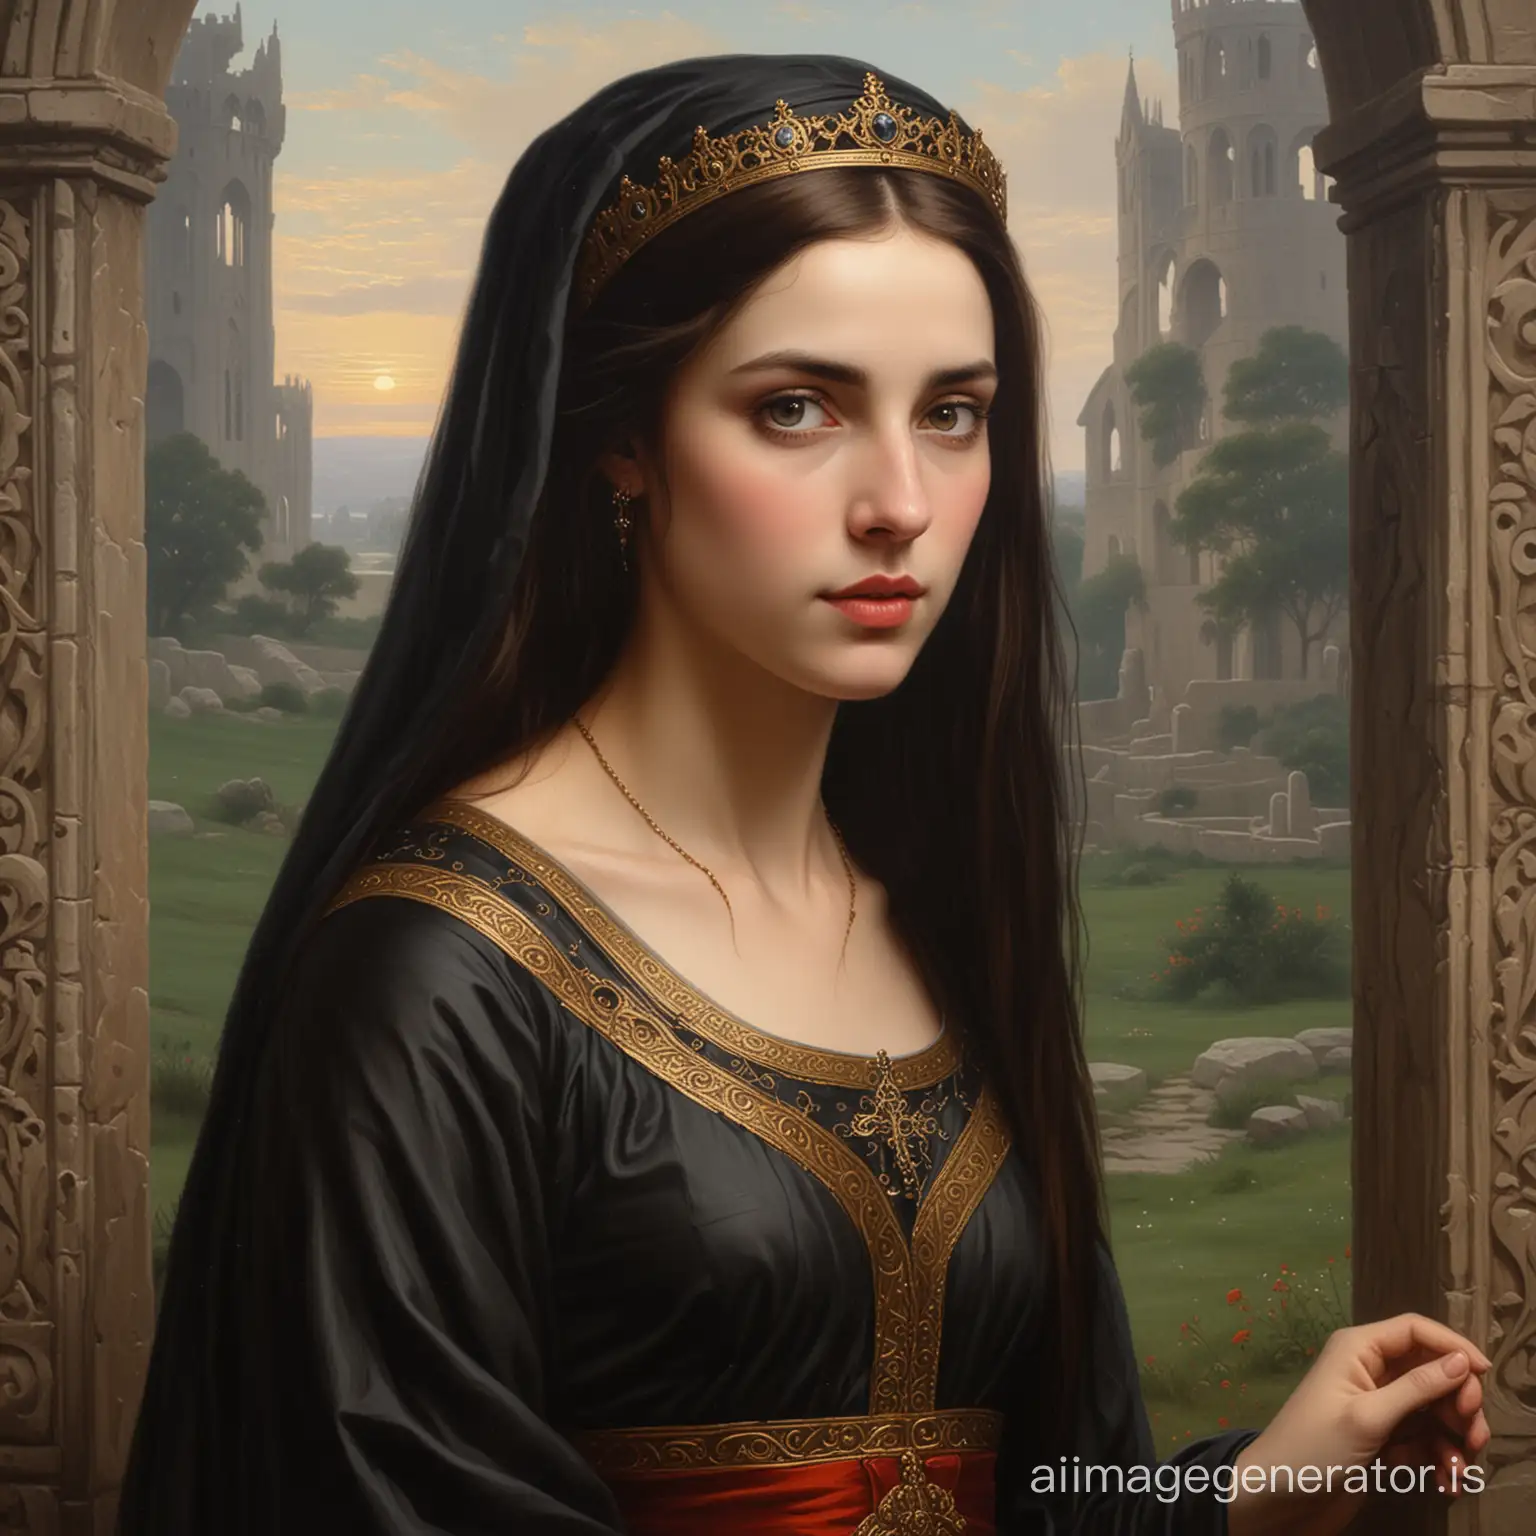 A John Waterhouse oil painting of a gothic princess in the 5th century